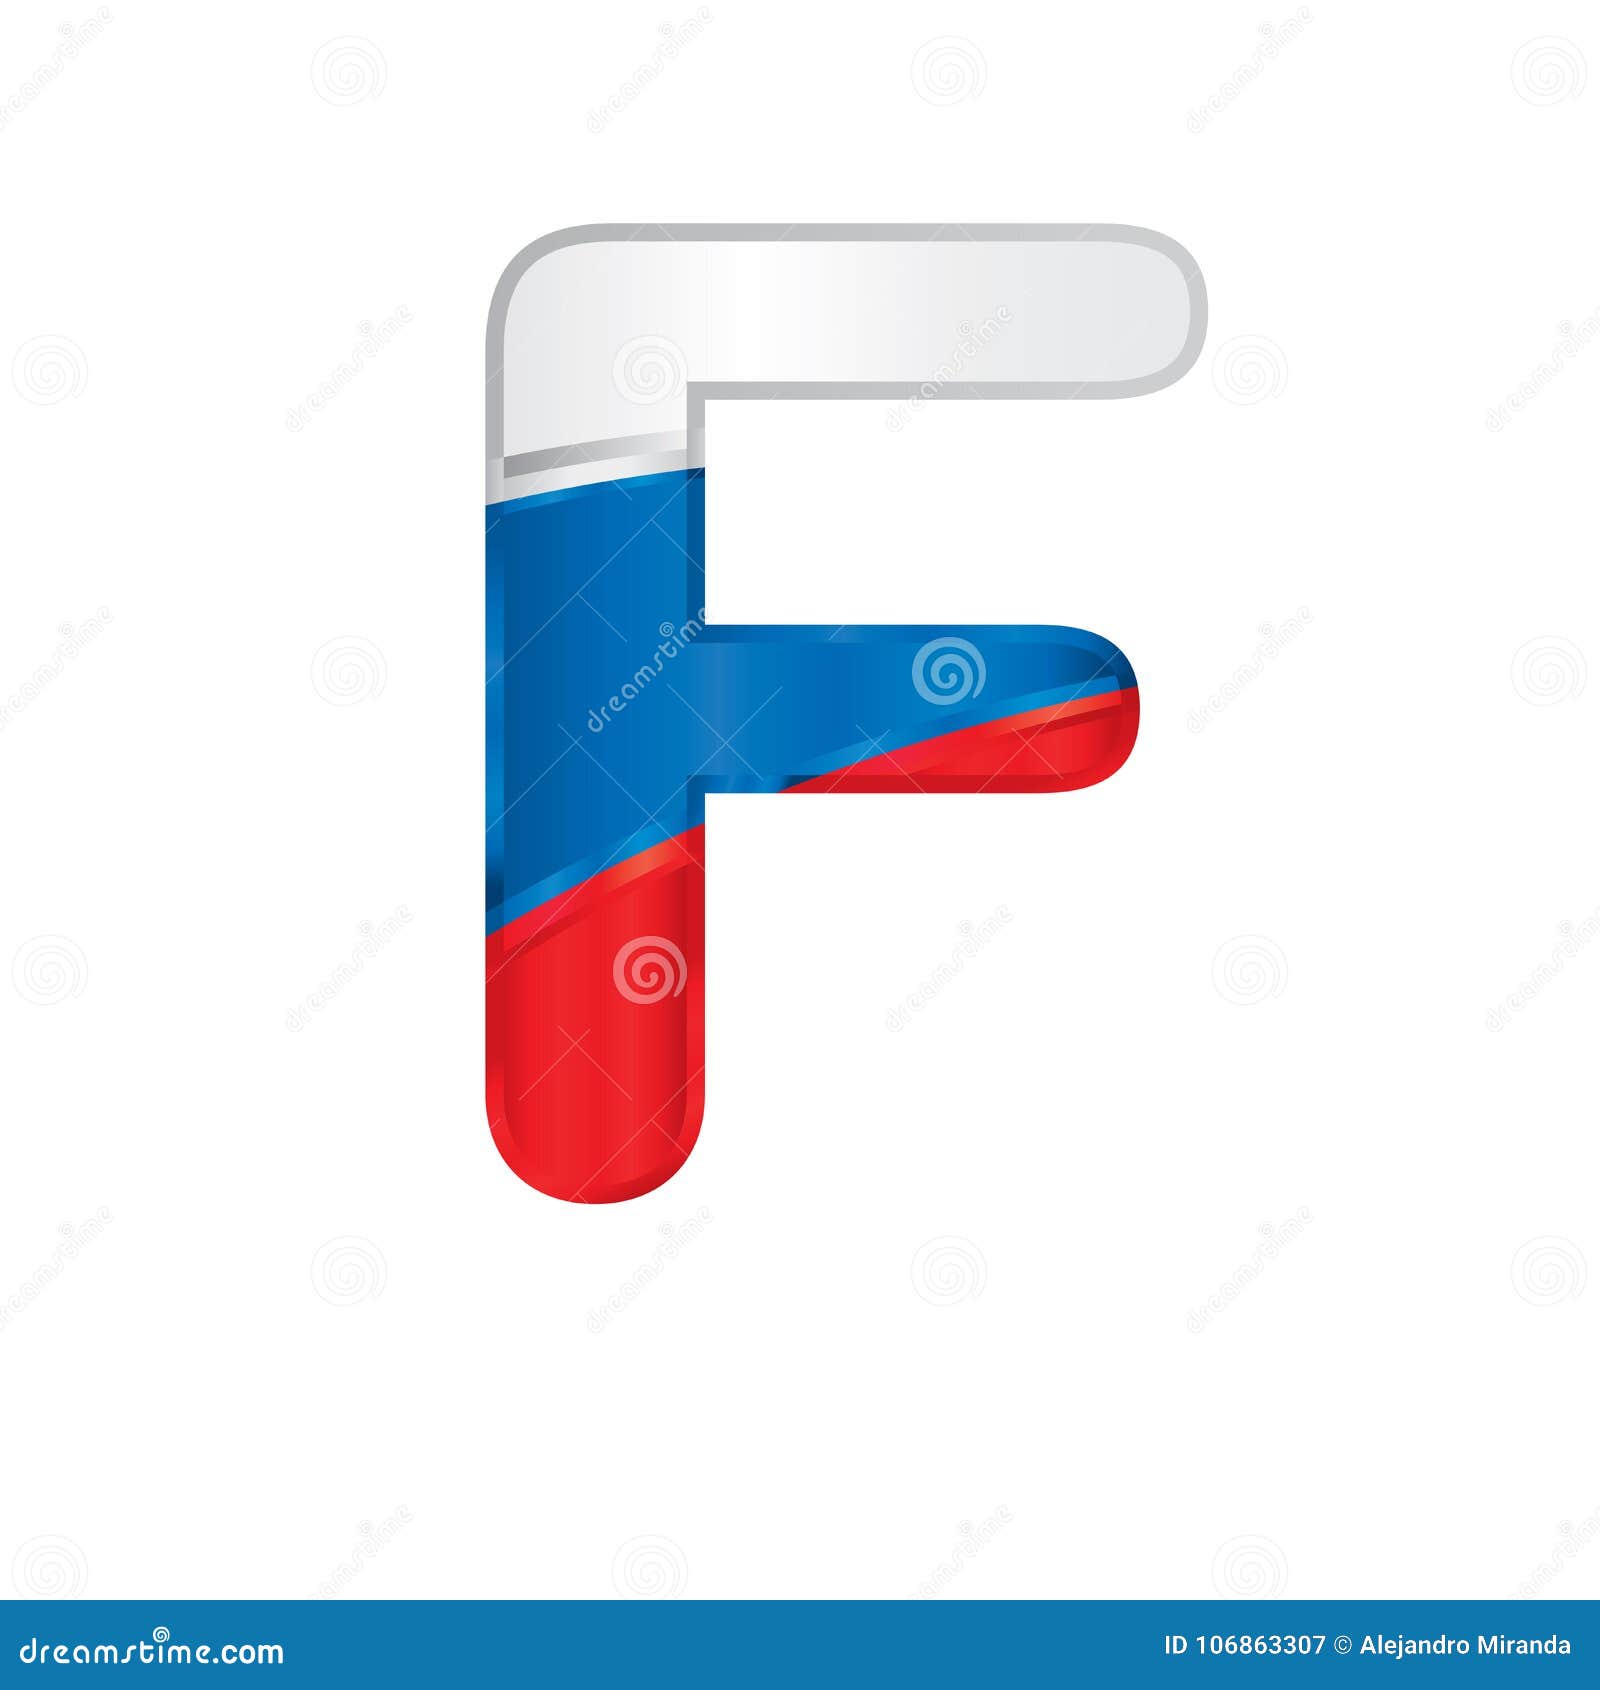 Russian Flag - White, Blue and Red